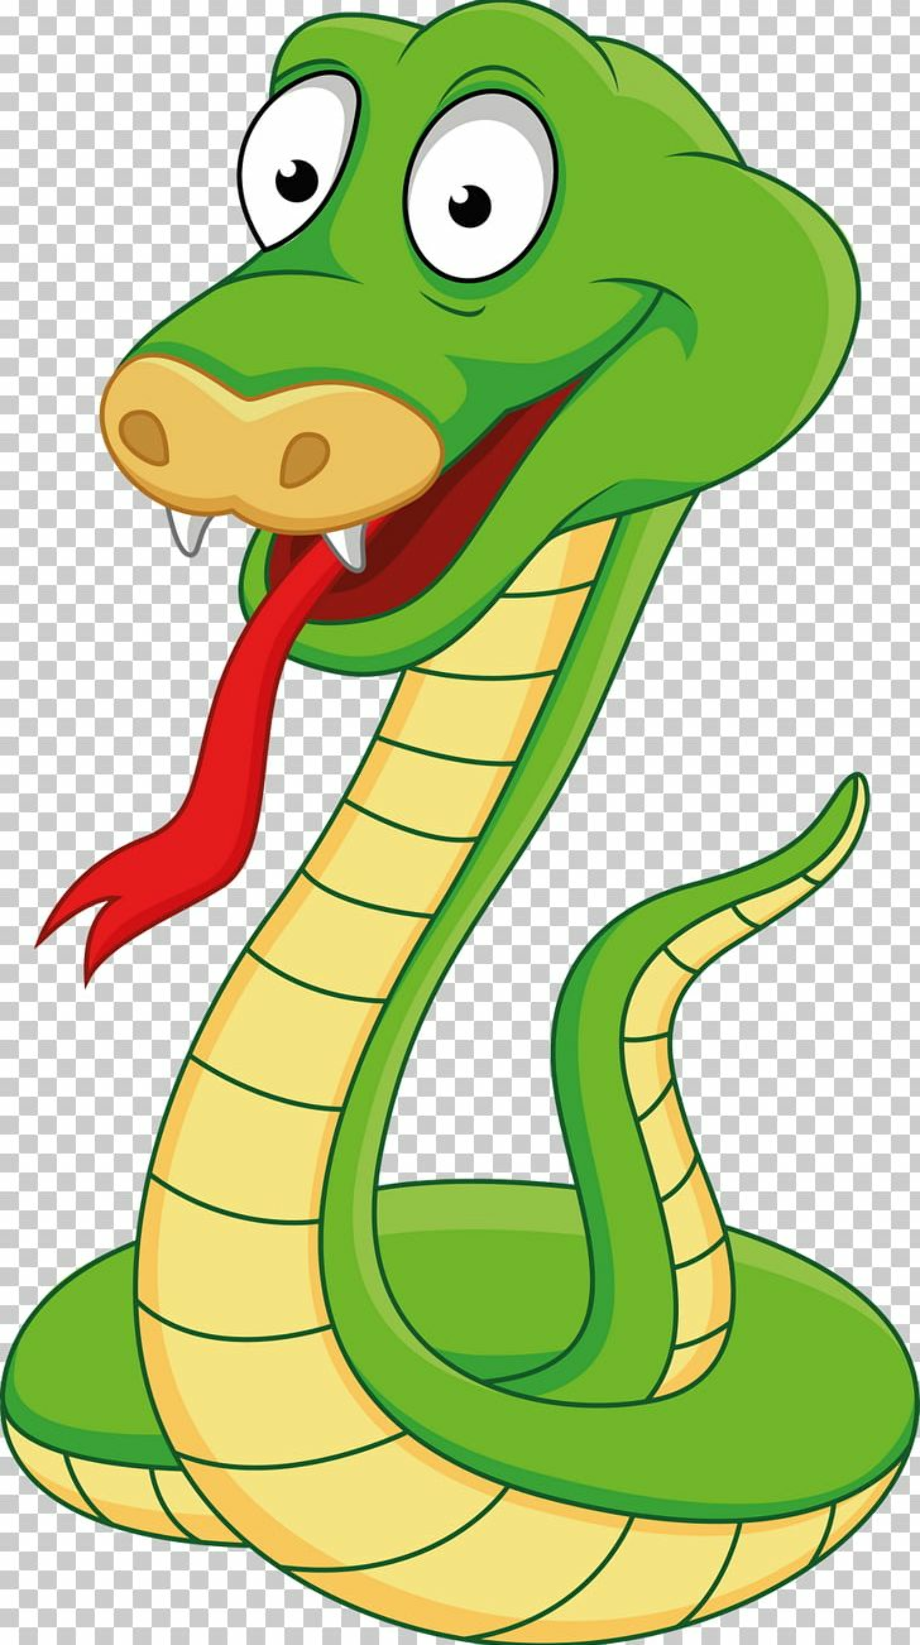 Download High Quality snake clipart animated Transparent PNG Images